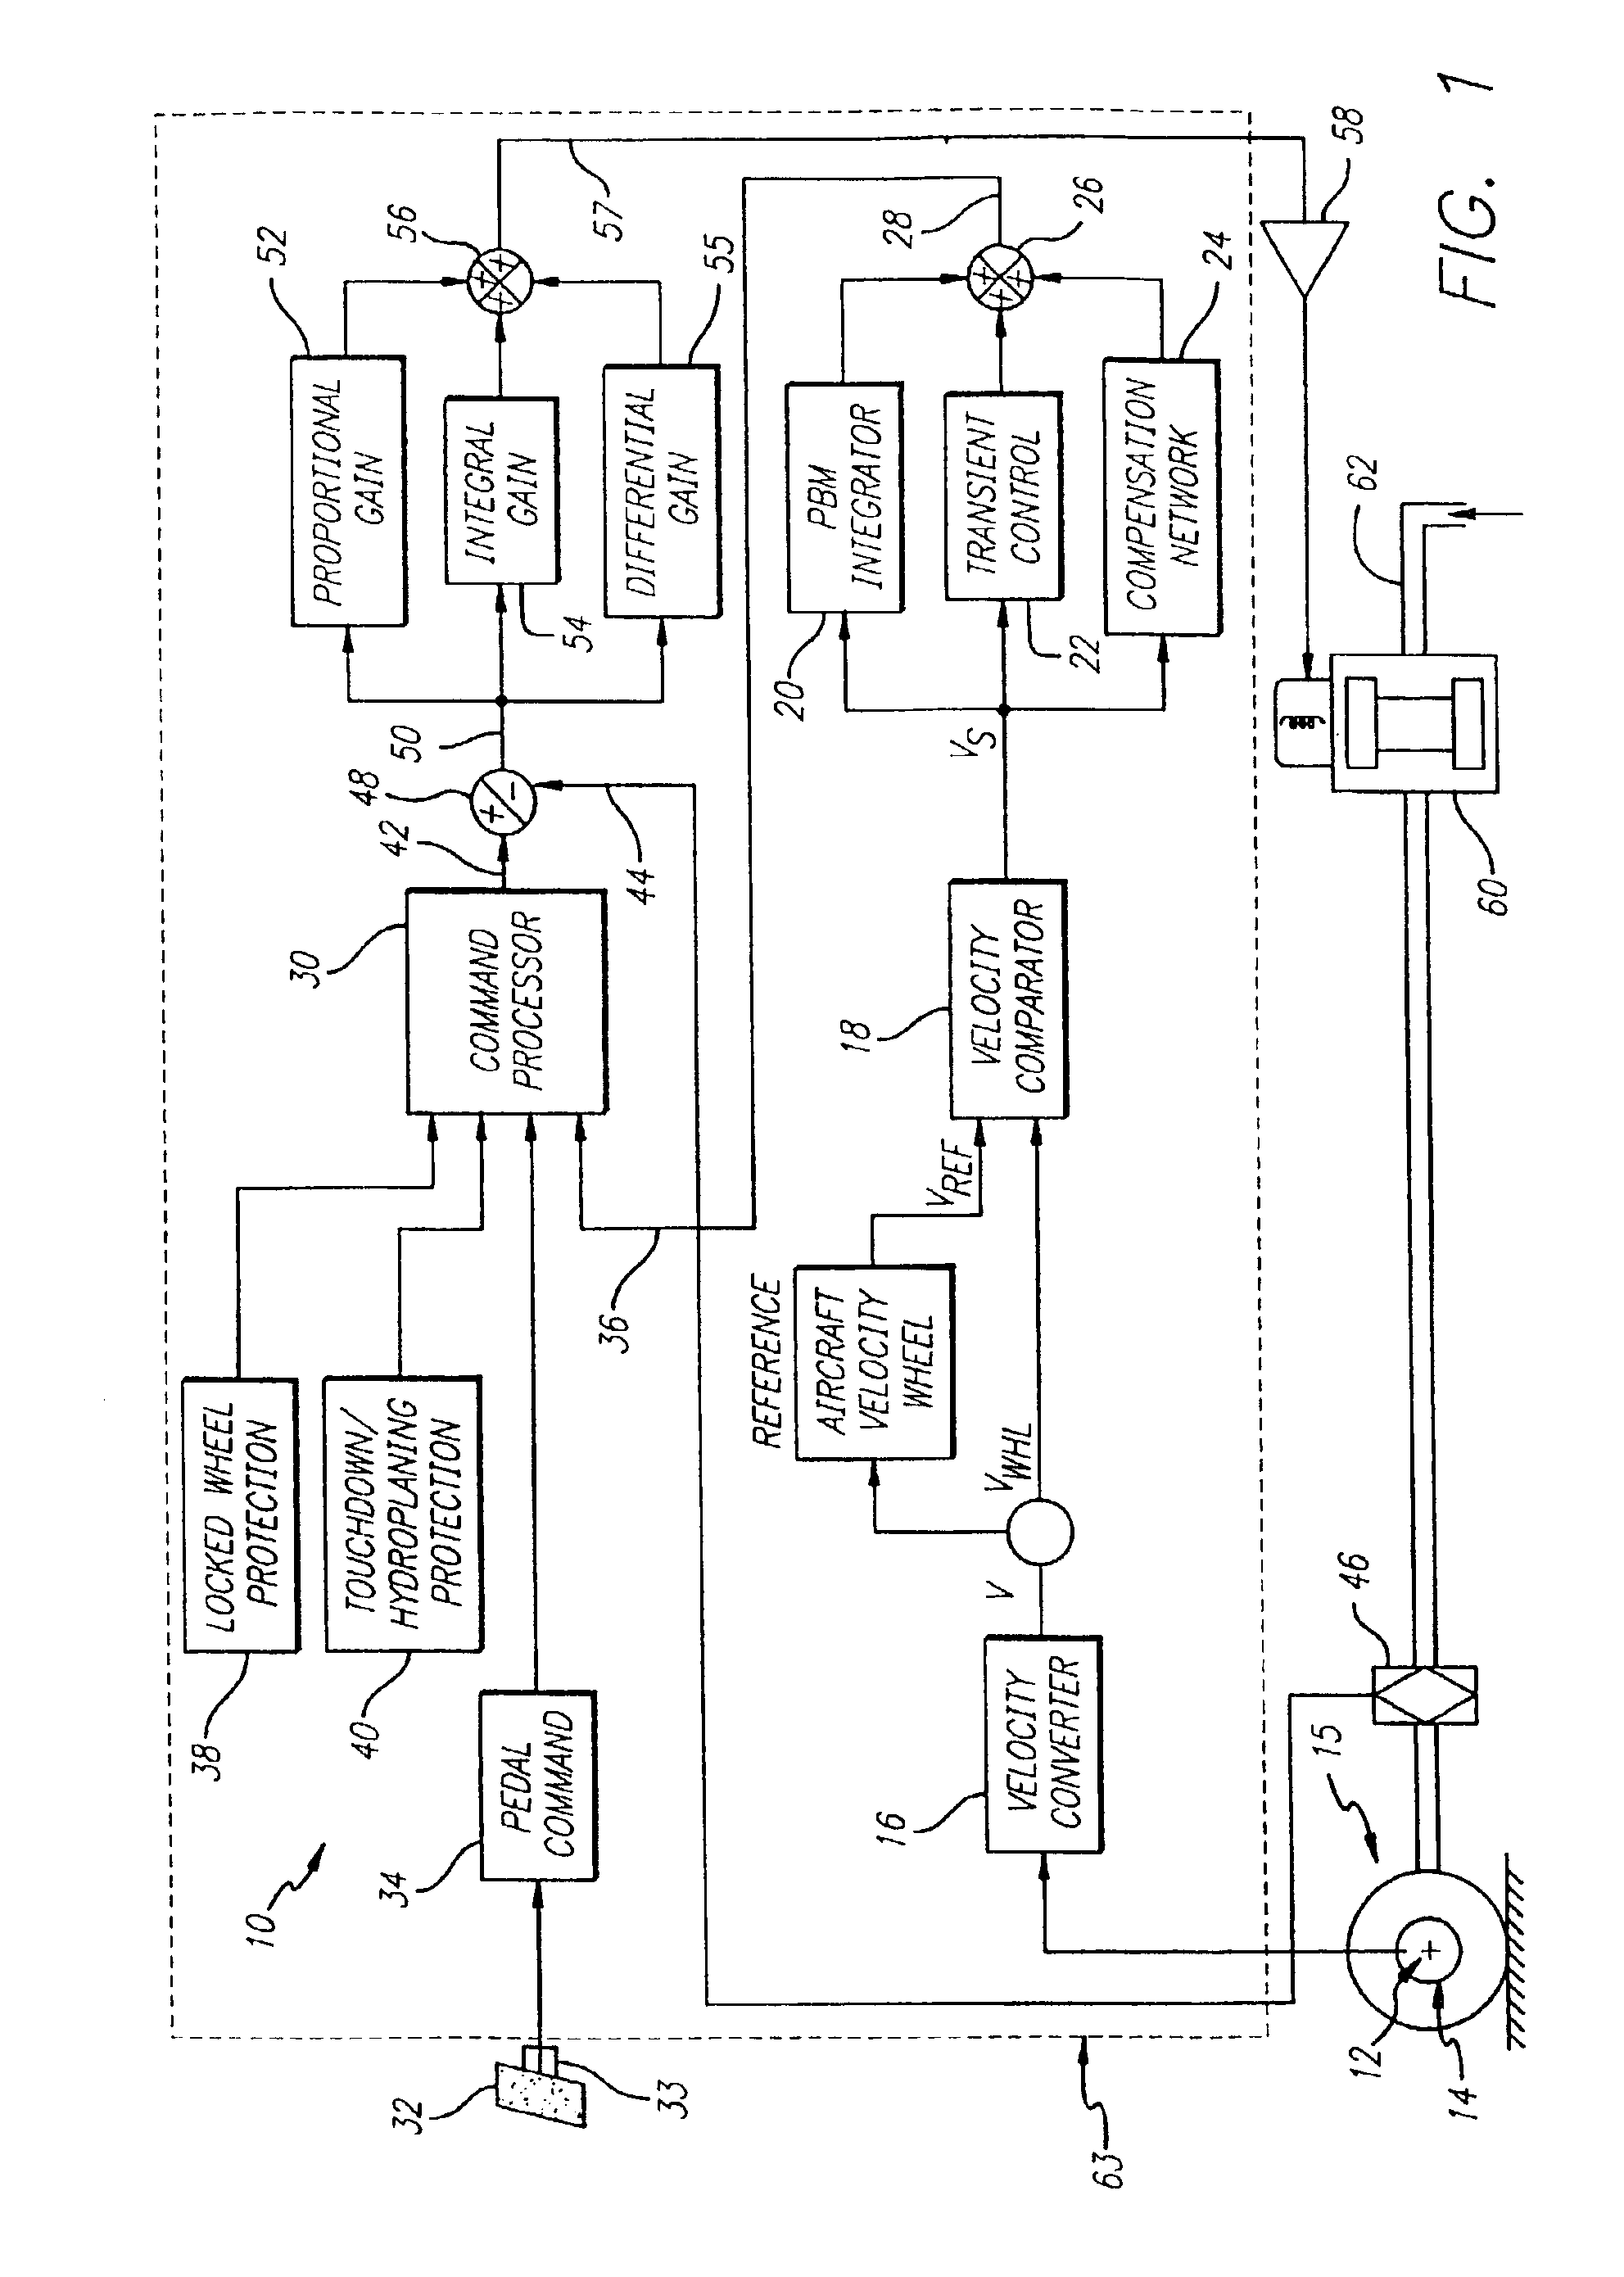 System and method for adaptive brake application and initial skid detection